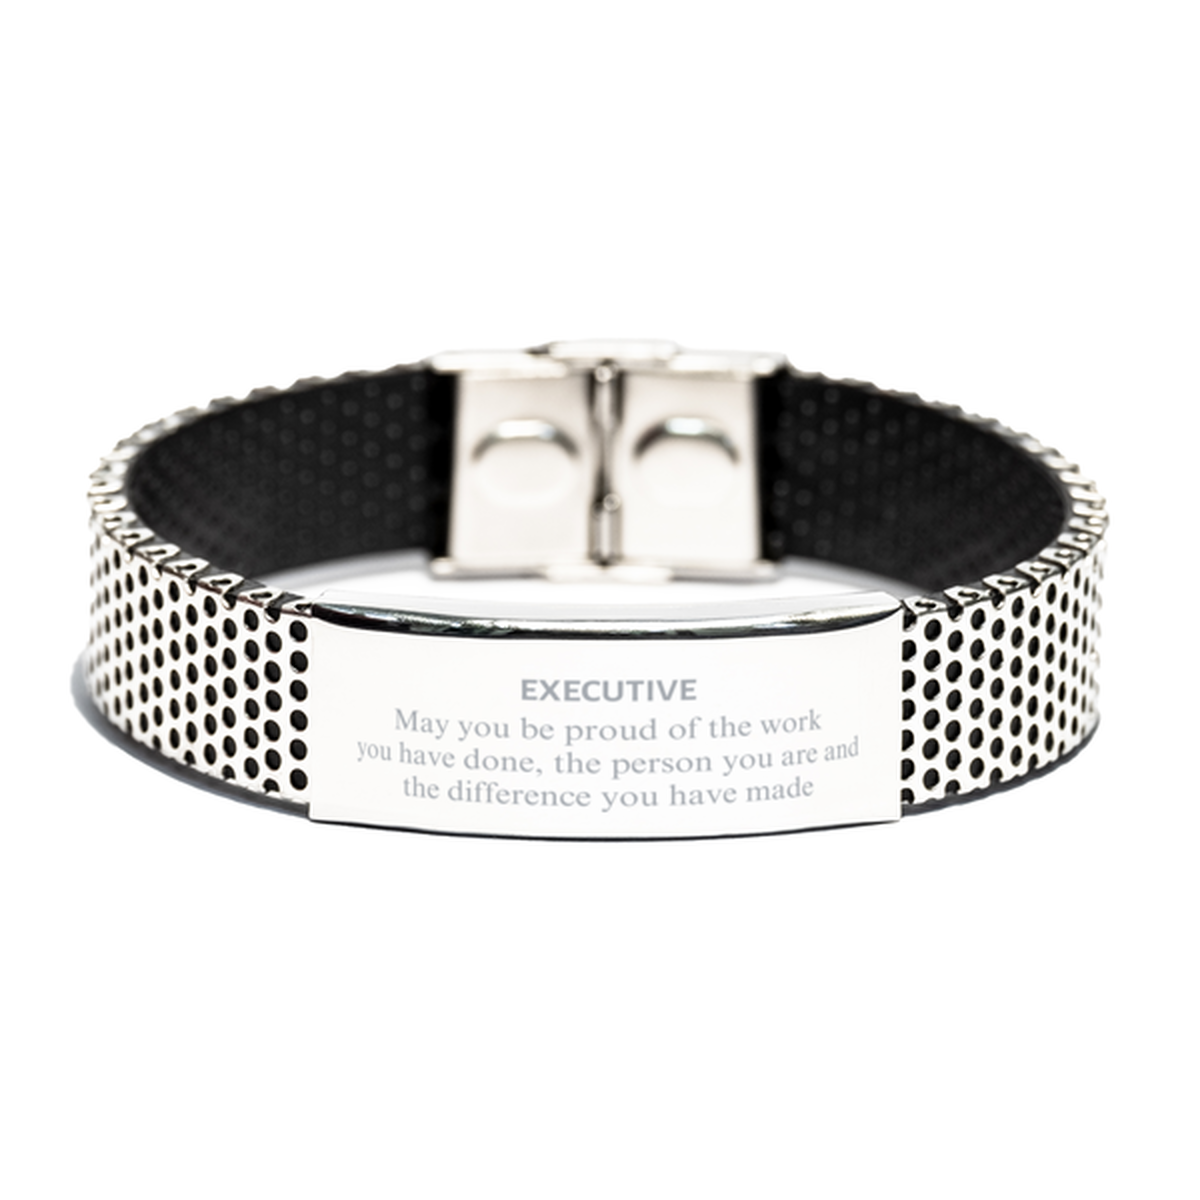 Executive May you be proud of the work you have done, Retirement Executive Stainless Steel Bracelet for Colleague Appreciation Gifts Amazing for Executive